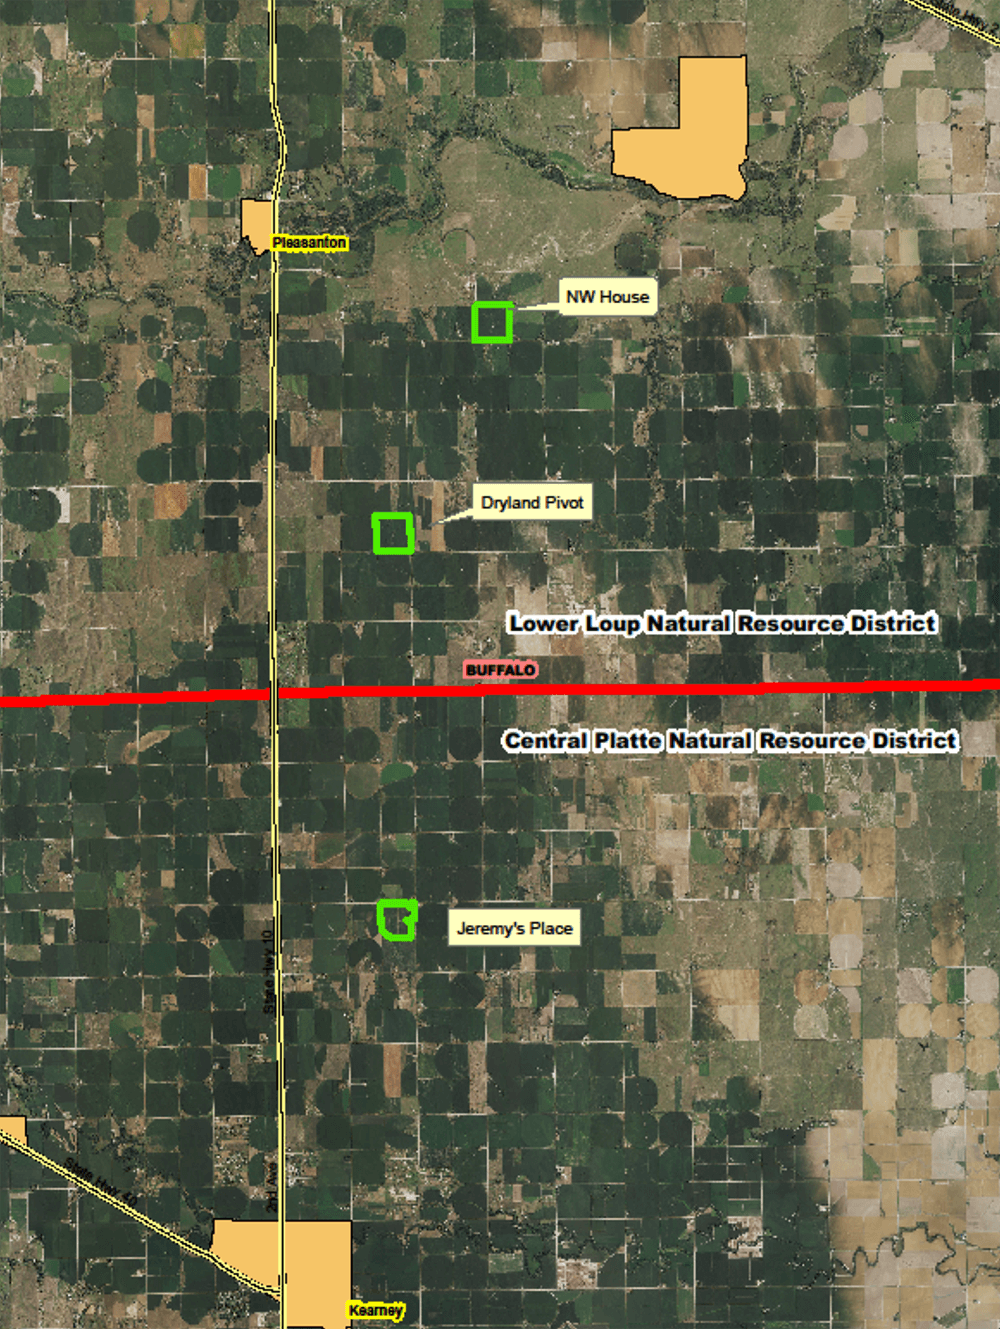 An aerial map with bold green outlines around three fields named NW House, Dryland Pivot, and Jeremy's Place, and a red boundary separating Lower Loup Natural Resources District and Central Platte Natural Resources District.